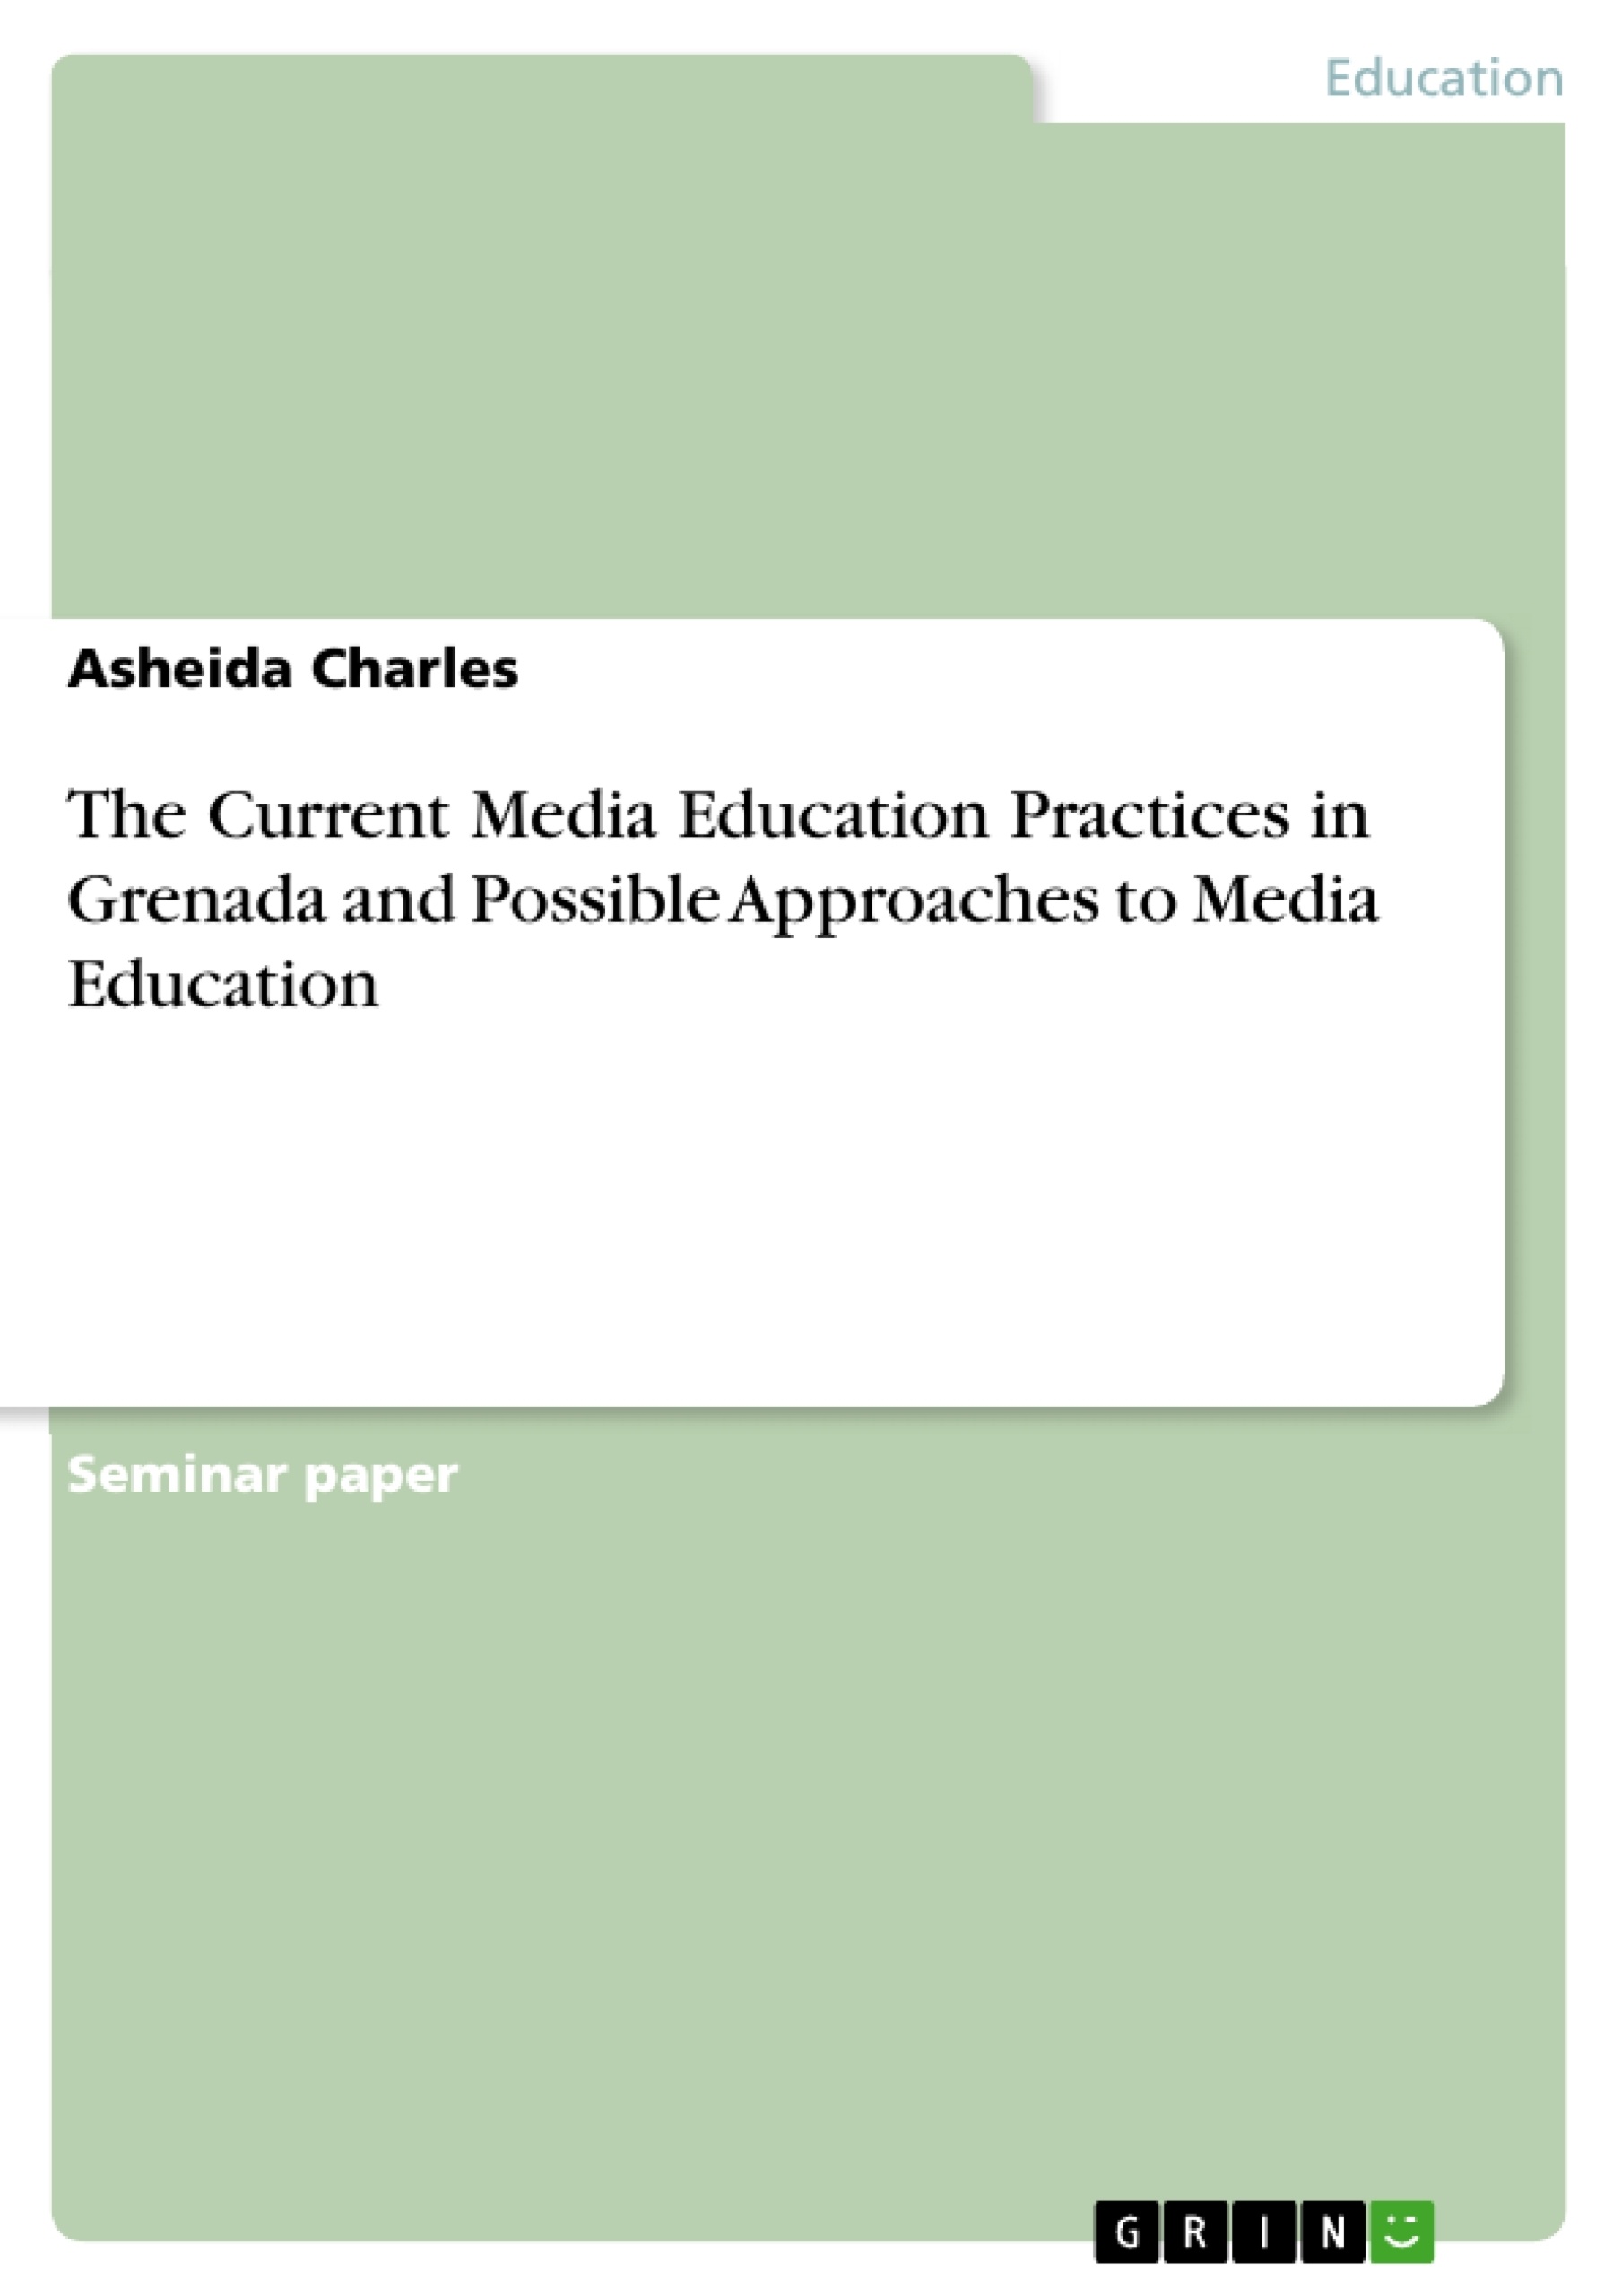 Title: The Current Media Education Practices in Grenada and Possible Approaches to Media Education